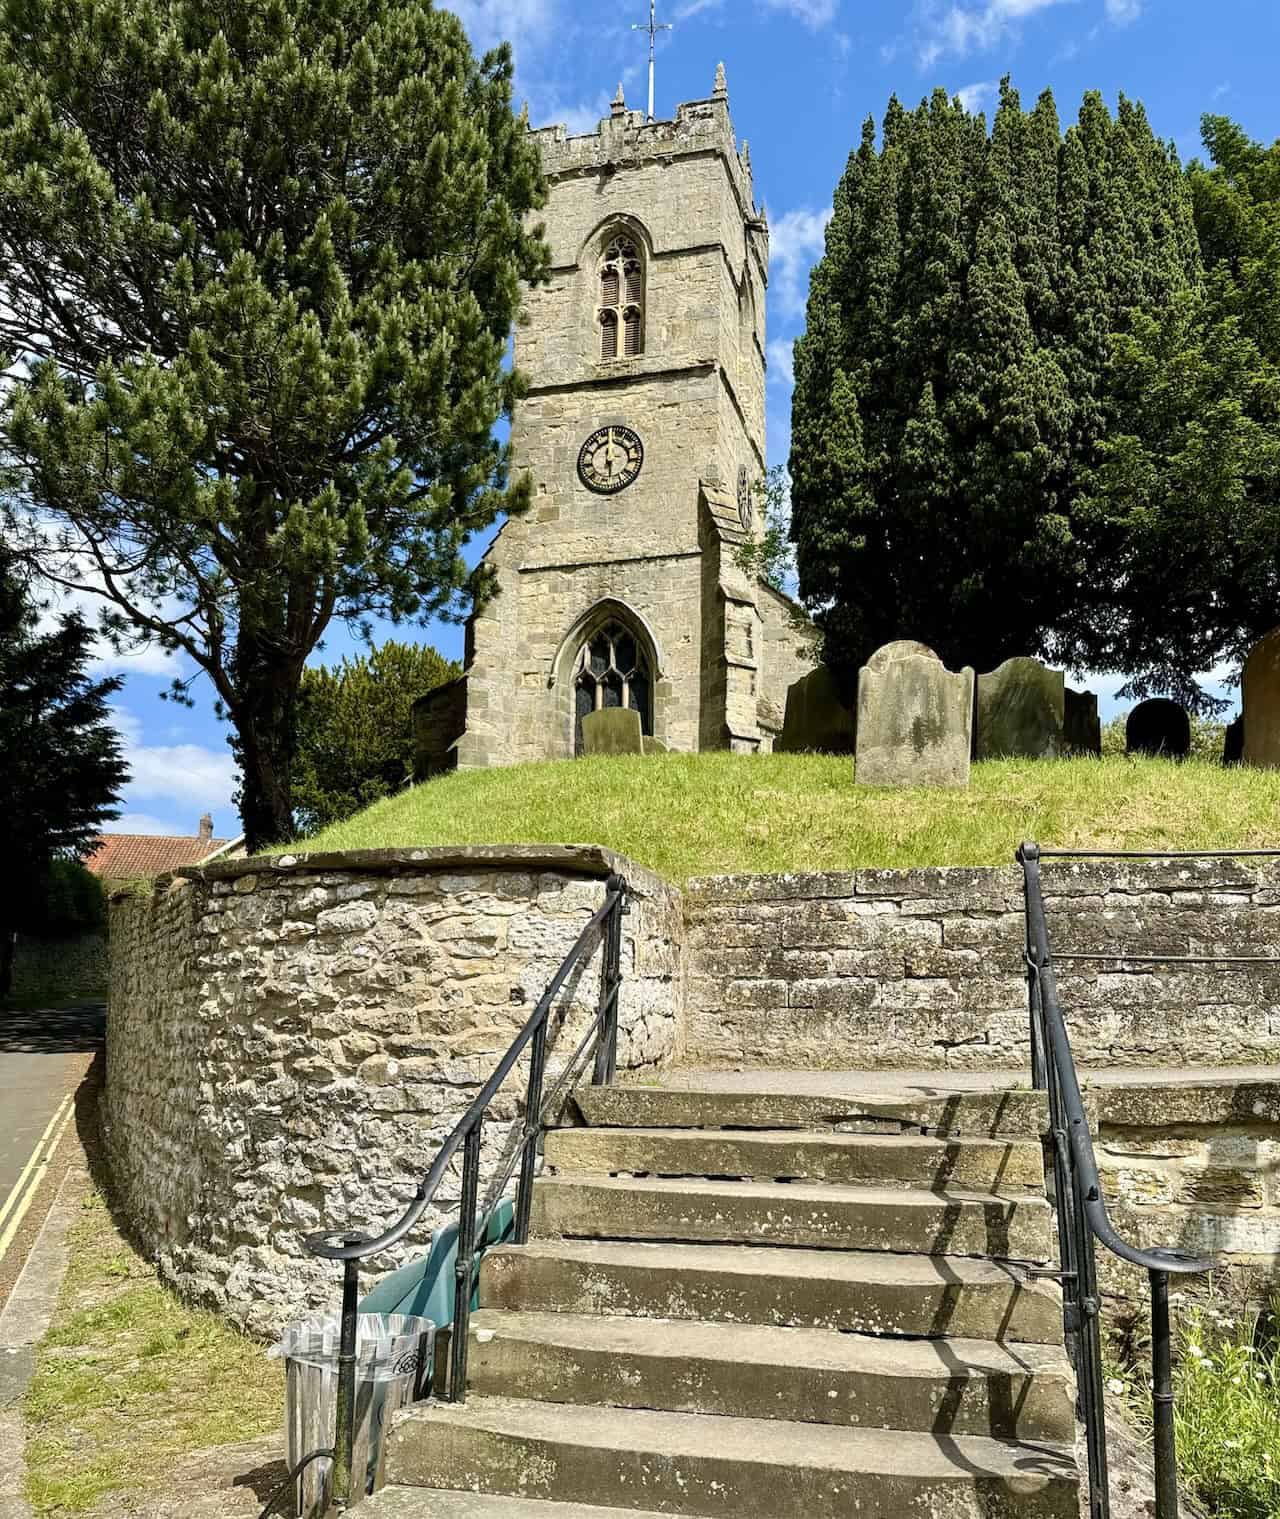 All Saints Church in Thornton-le-Dale stands prominently on a hill beside the A170 Pickering to Scarborough road, overlooking the picturesque village.